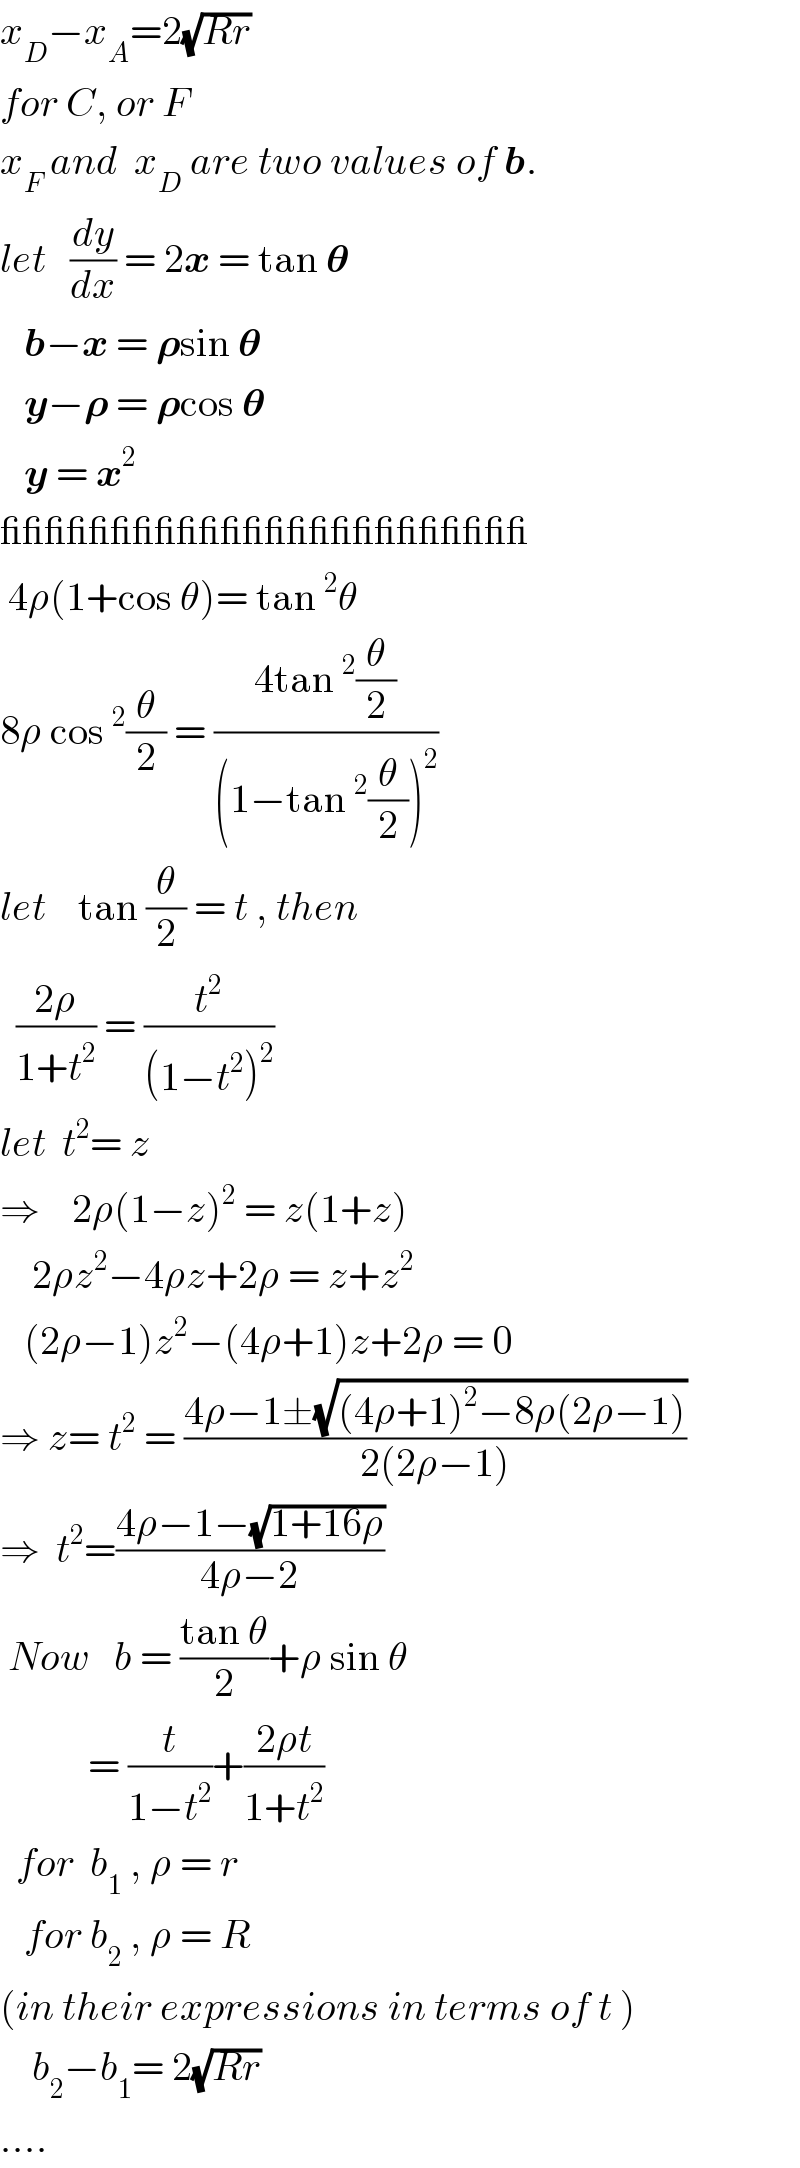 x_D −x_A =2(√(Rr))  for C, or F  x_F  and  x_D  are two values of b.  let   (dy/dx) = 2x = tan 𝛉     b−x = 𝛒sin 𝛉     y−𝛒 = 𝛒cos 𝛉     y = x^2   ________________________   4ρ(1+cos θ)= tan^2 θ  8ρ cos^2 (θ/2) = ((4tan^2 (θ/2))/((1−tan^2 (θ/2))^2 ))  let    tan (θ/2) = t , then    ((2ρ)/(1+t^2 )) = (t^2 /((1−t^2 )^2 ))  let  t^2 = z  ⇒    2ρ(1−z)^2  = z(1+z)      2ρz^2 −4ρz+2ρ = z+z^2      (2ρ−1)z^2 −(4ρ+1)z+2ρ = 0  ⇒ z= t^2  = ((4ρ−1±(√((4ρ+1)^2 −8ρ(2ρ−1))))/(2(2ρ−1)))  ⇒  t^2 =((4ρ−1−(√(1+16ρ)))/(4ρ−2))   Now   b = ((tan θ)/2)+ρ sin θ             = (t/(1−t^2 ))+((2ρt)/(1+t^2 ))    for  b_1  , ρ = r     for b_2  , ρ = R  (in their expressions in terms of t )      b_2 −b_1 = 2(√(Rr))  ....  